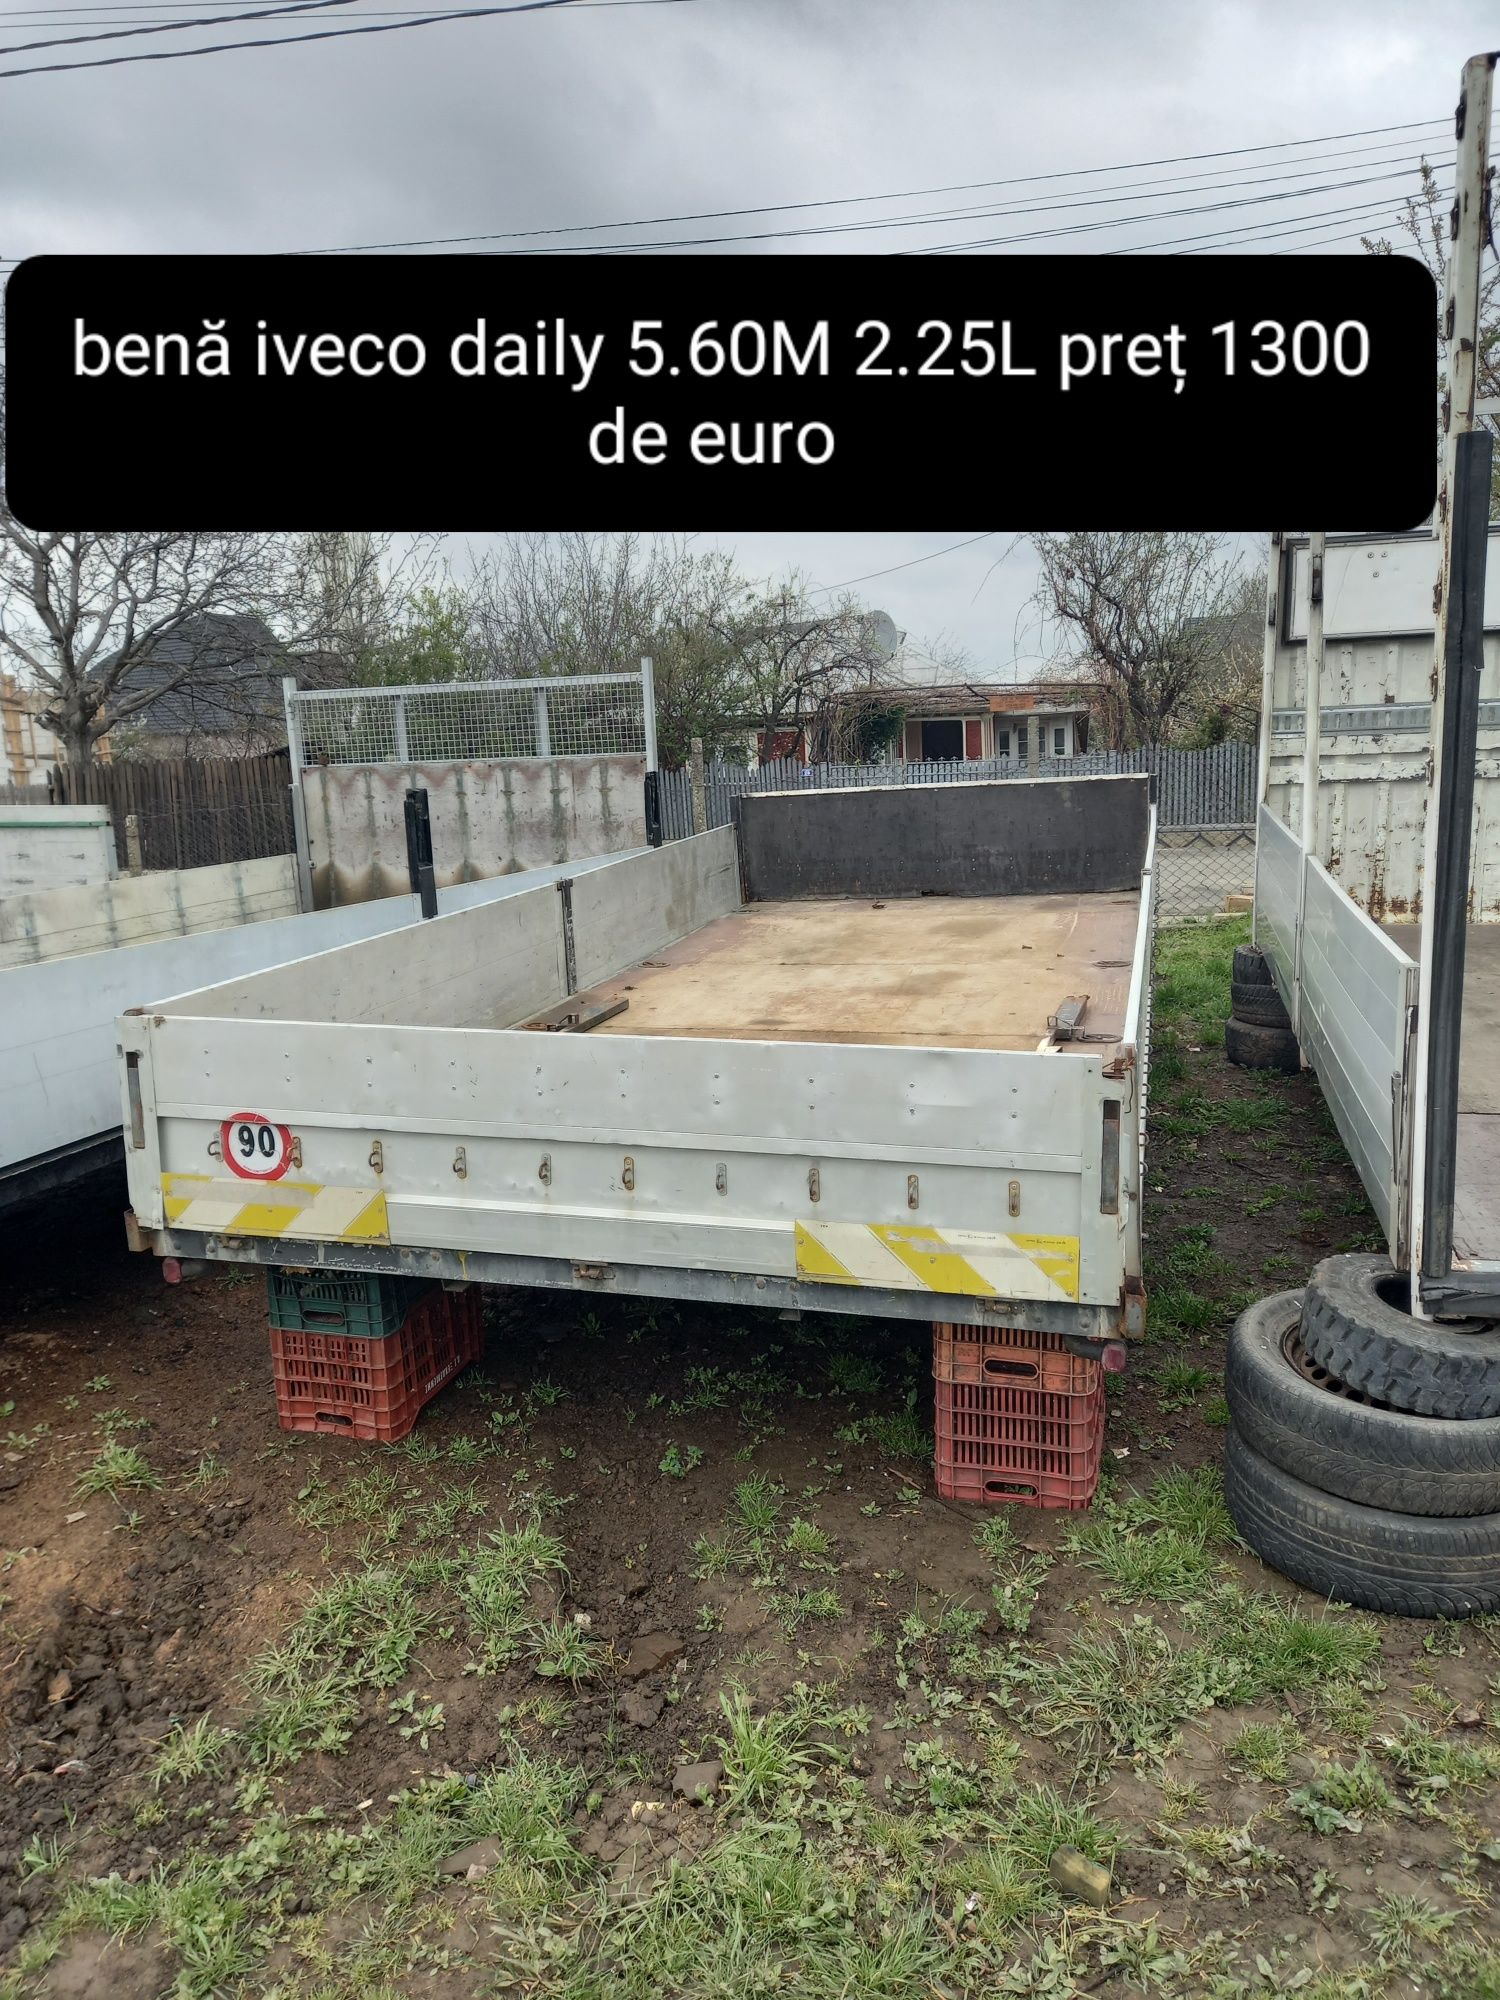 Bene iveco daily